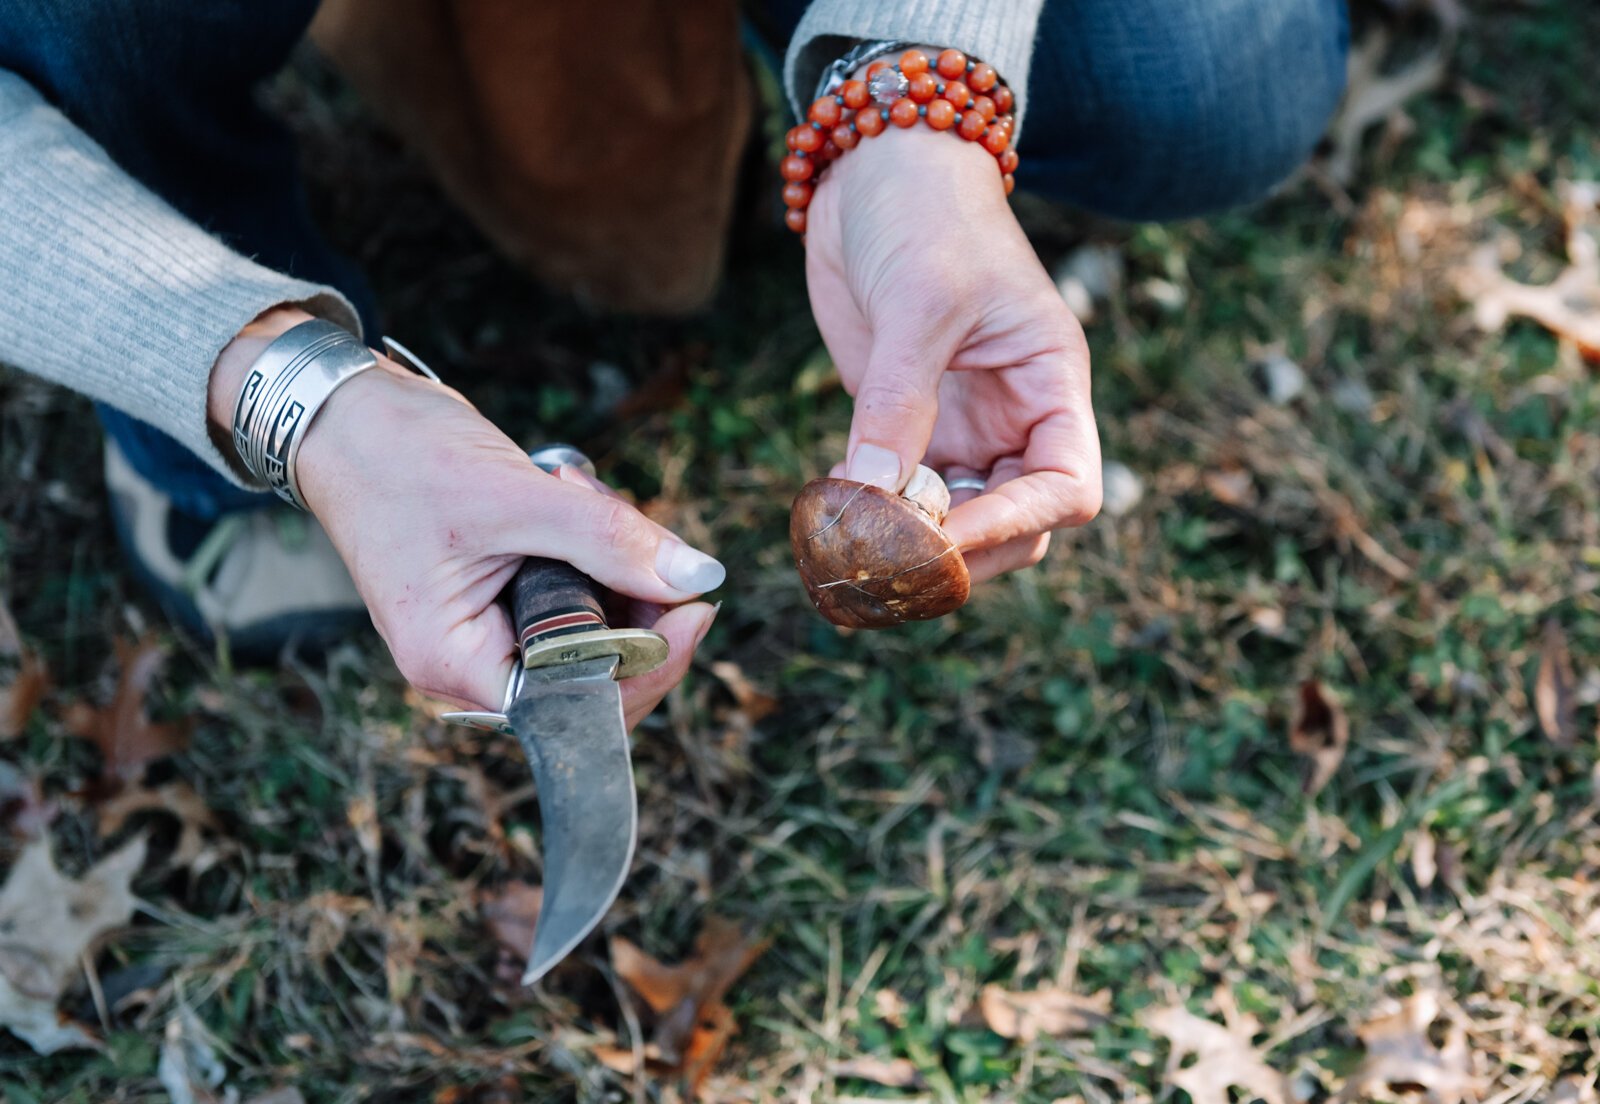 Claudia Hedeen of the Miami Tribe of Oklahoma, forages a mushroom from the genus Suillus with her dog Hobbes on Miami tribal property in Fort Wayne.